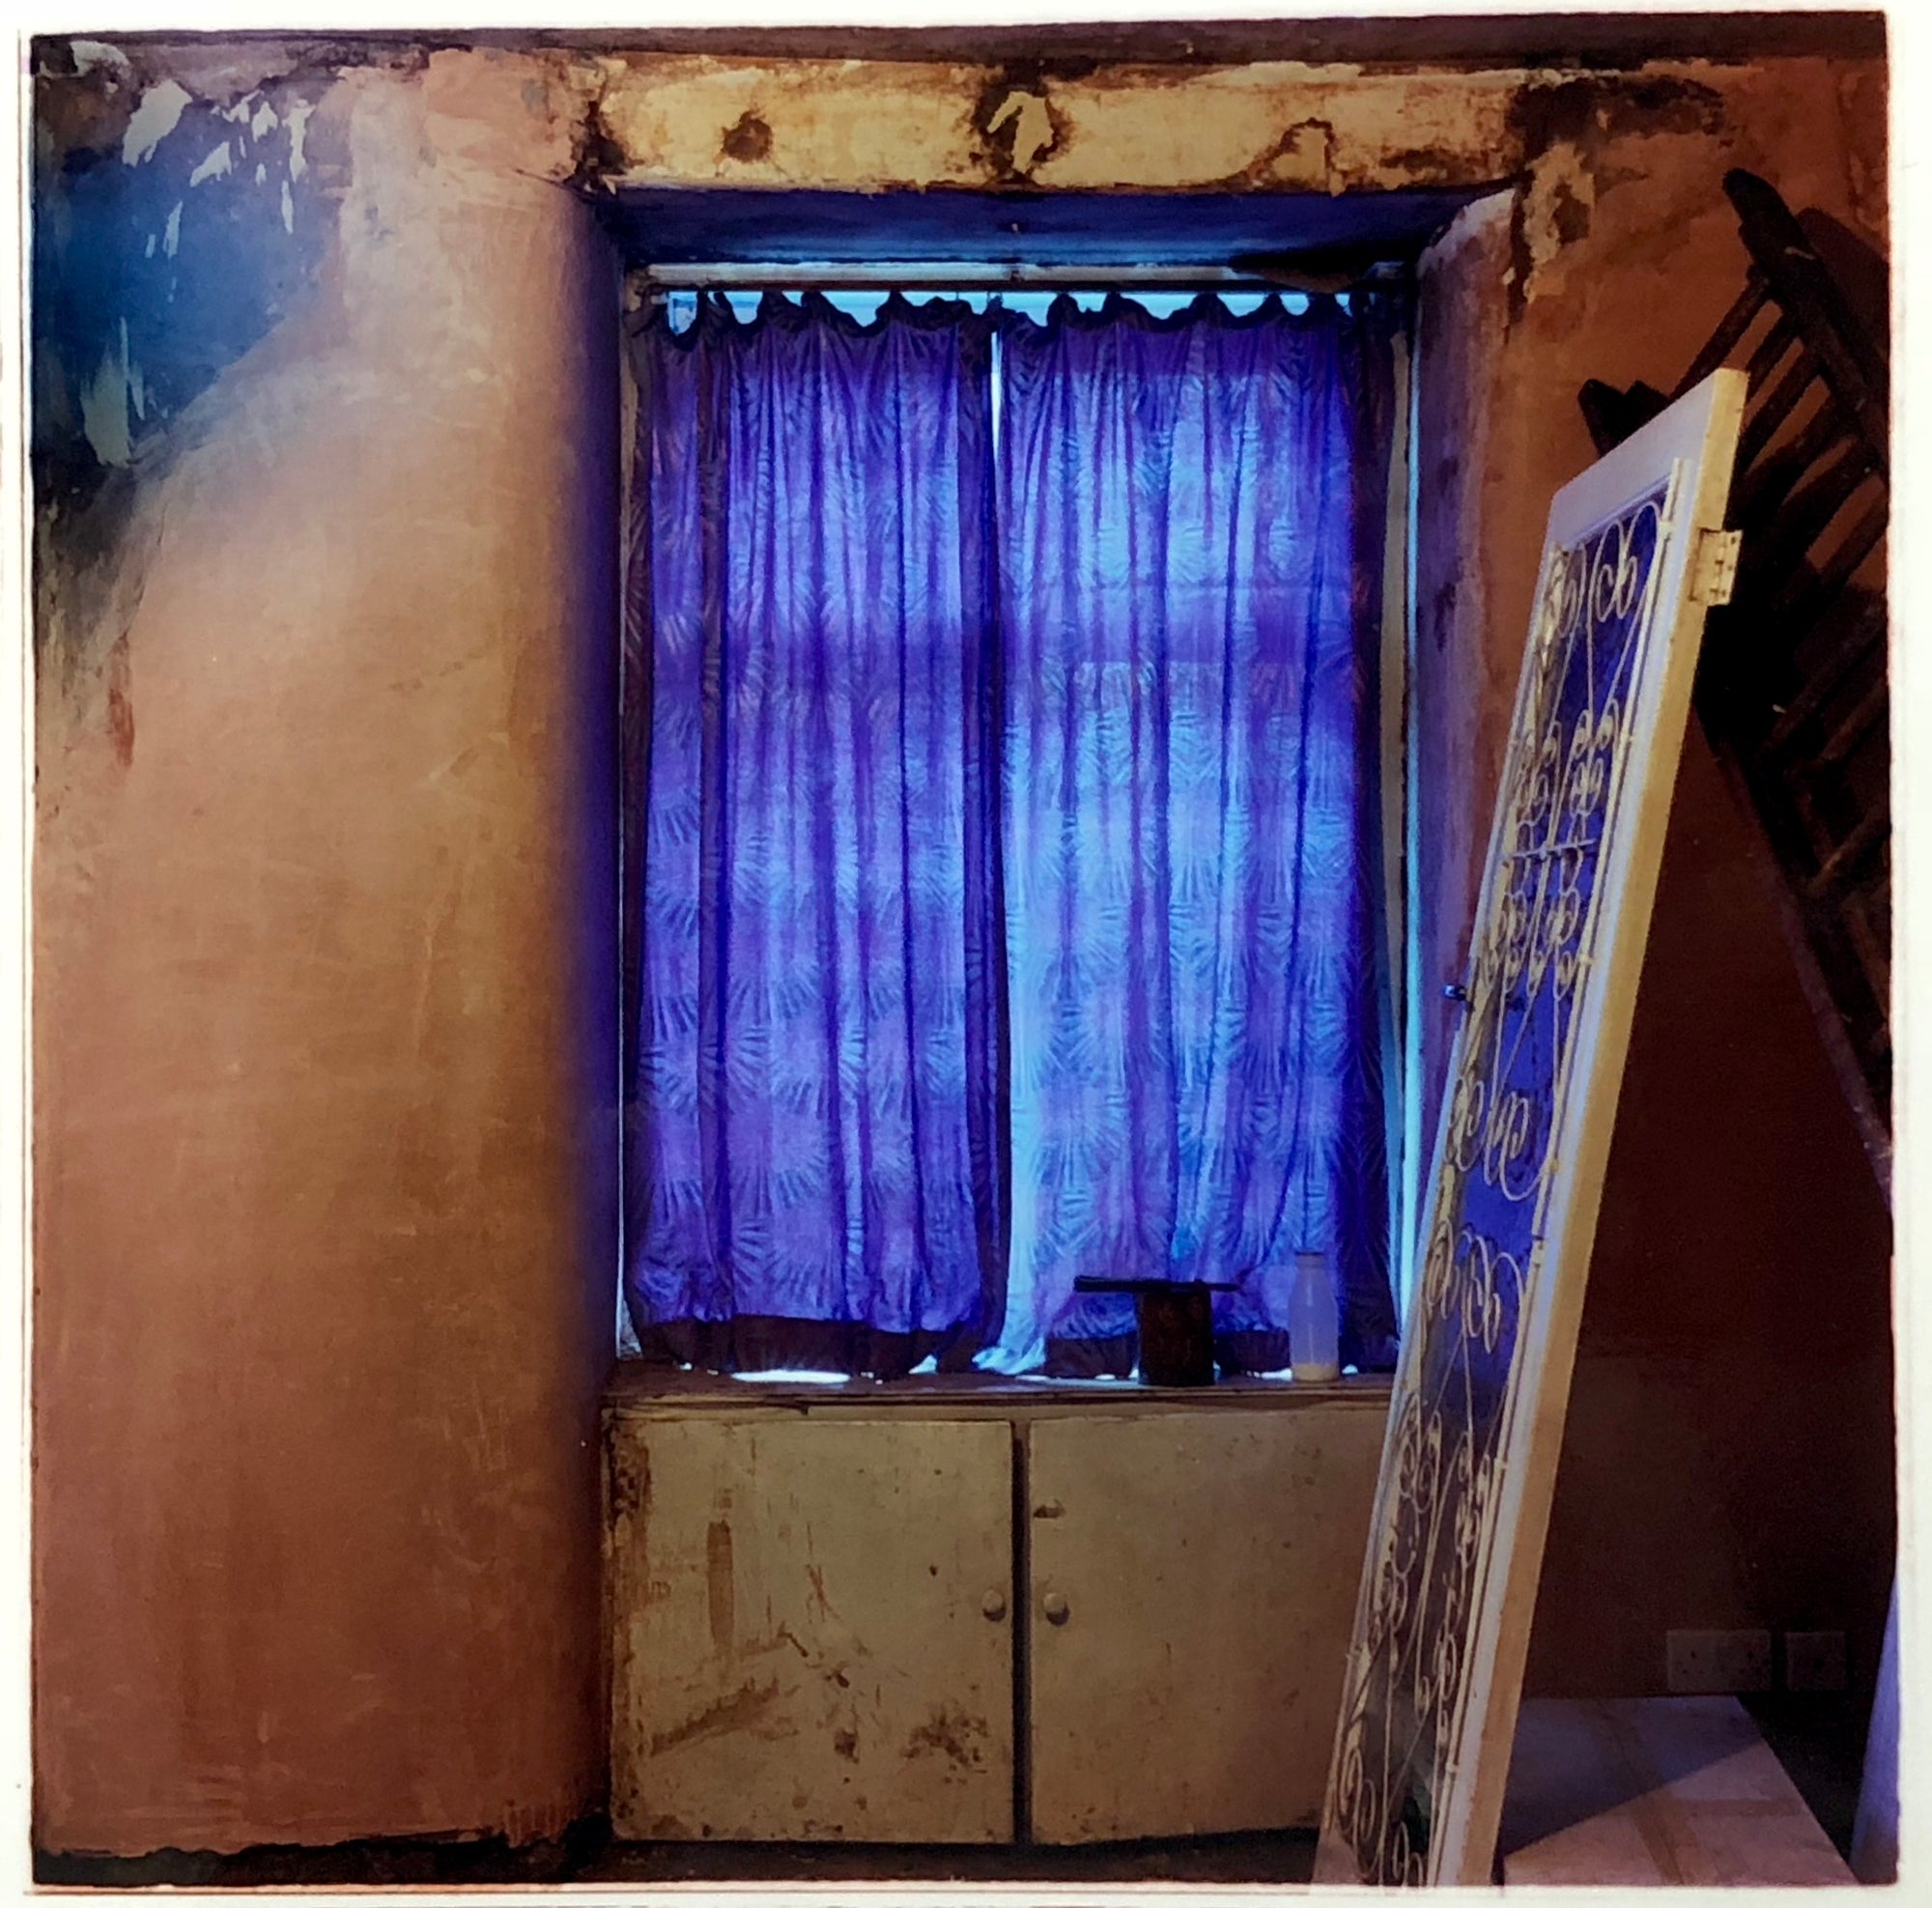 Interior photography of a dilapidated home with a purple curtain.